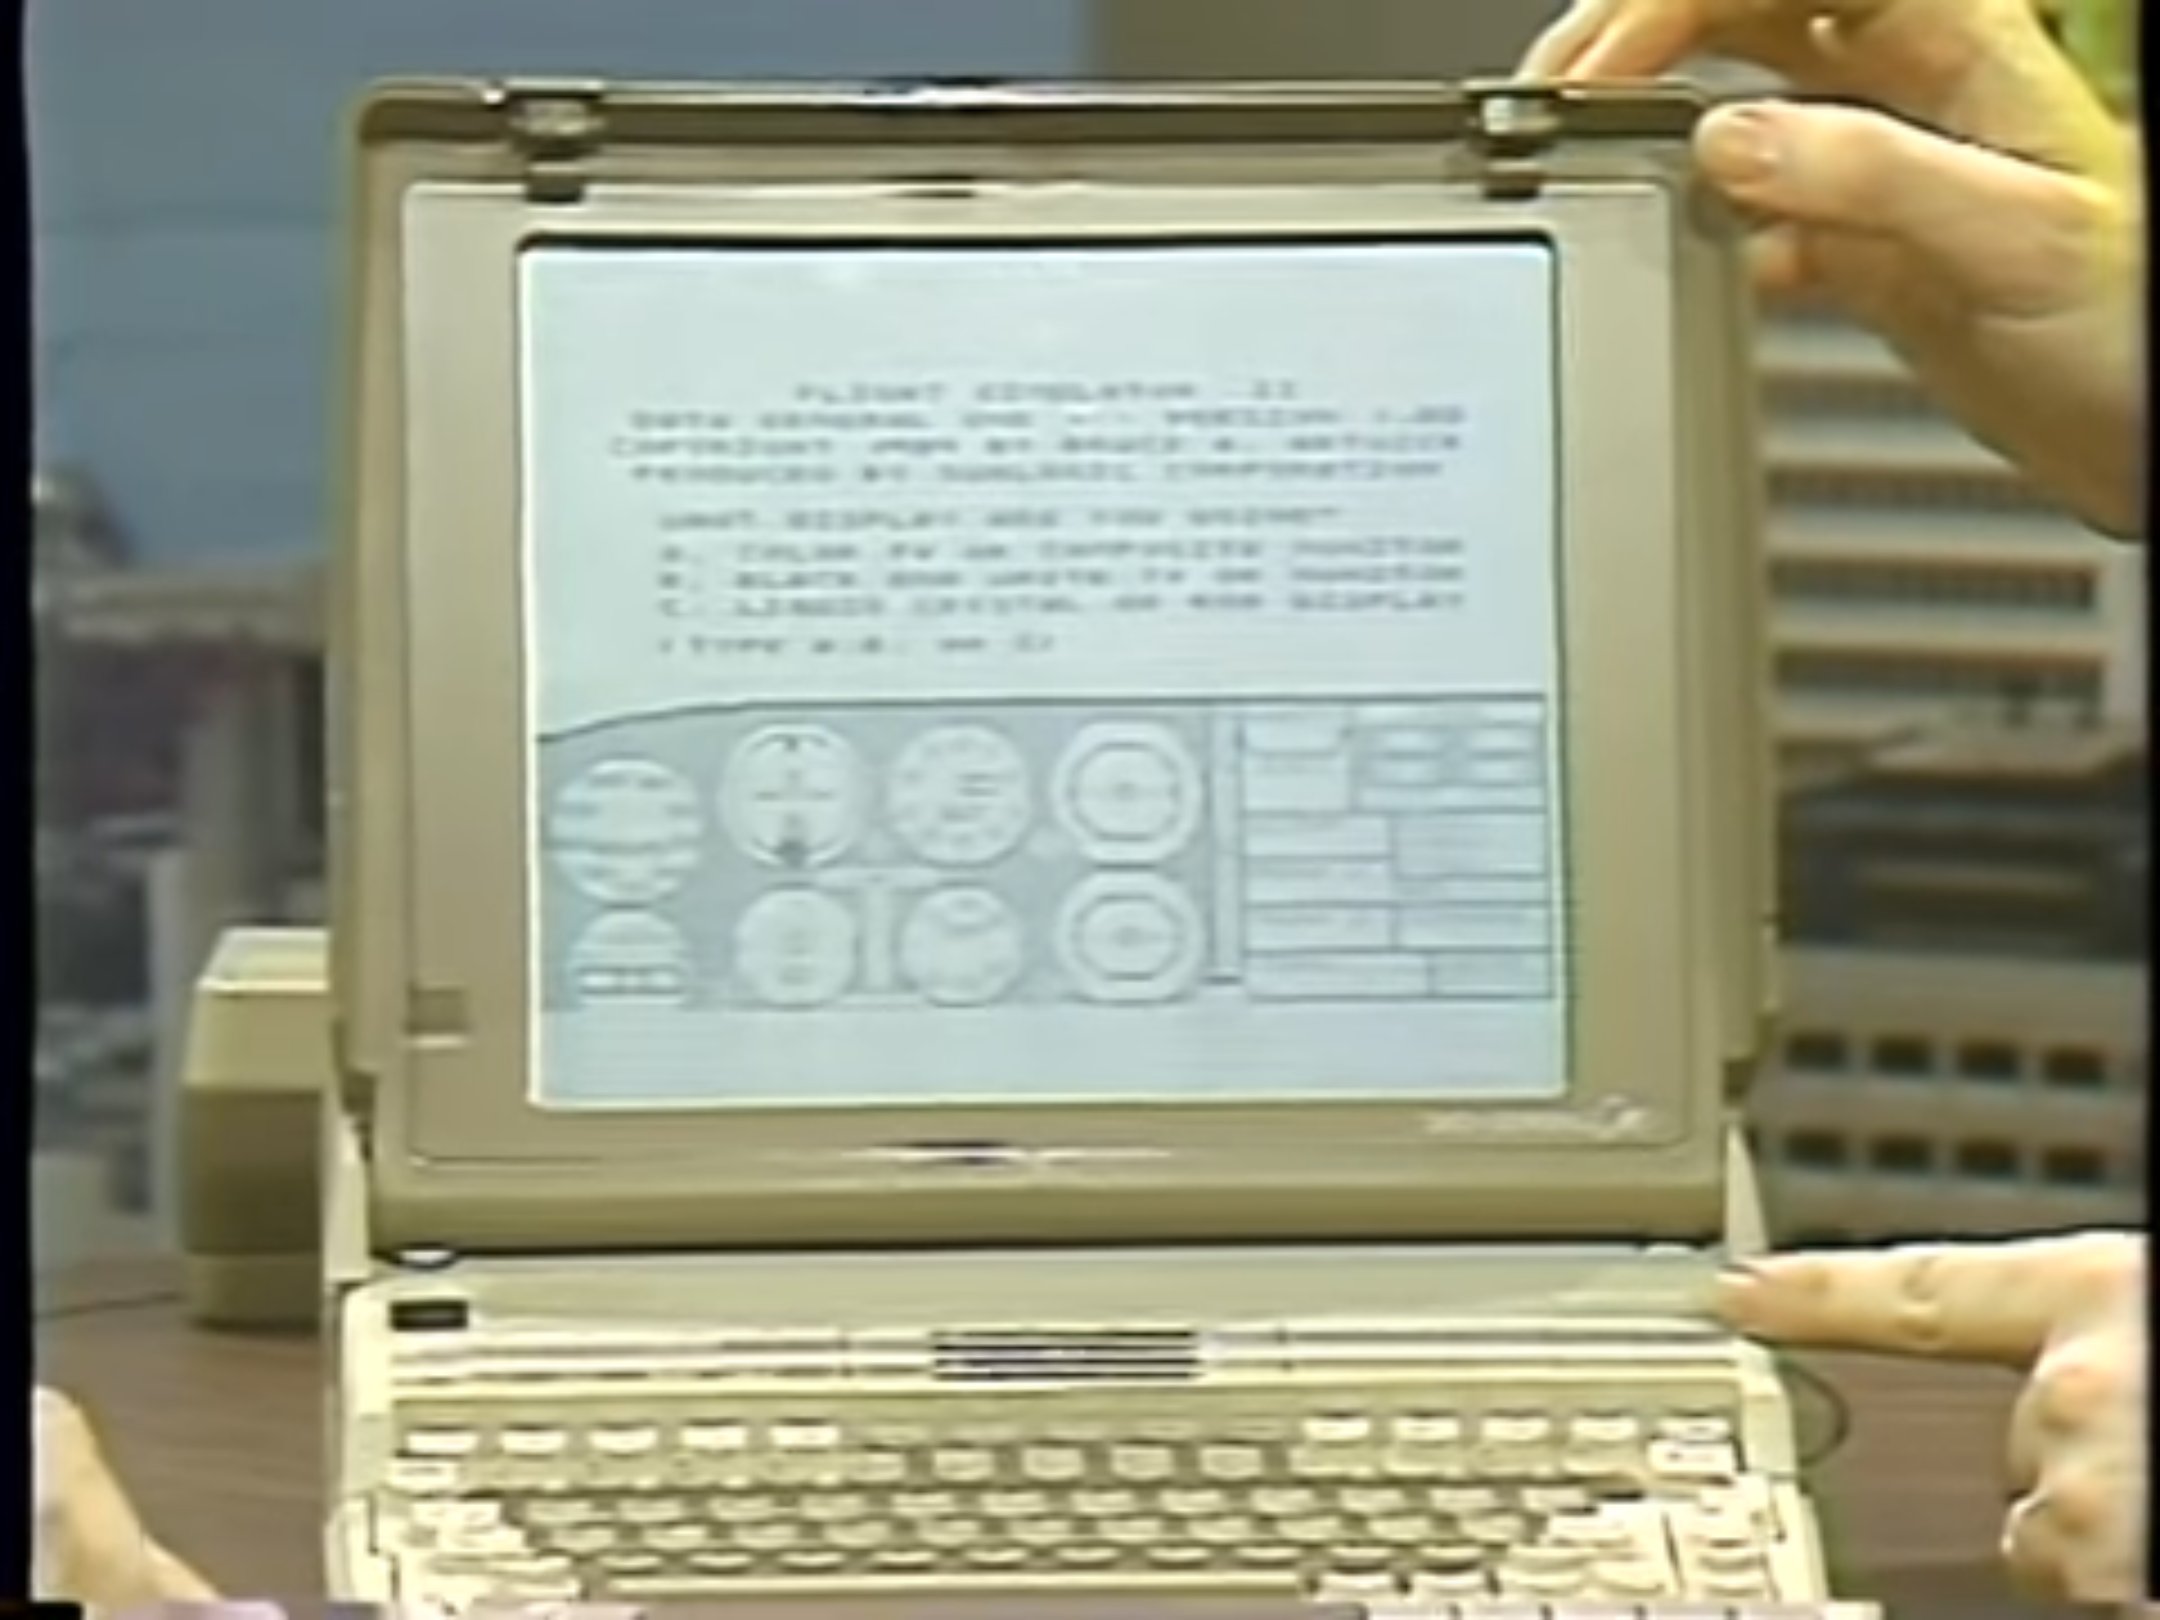 Microsoft Flight Simulator running on a black-and-white display of a Data General-One portable computer during an episode of &ldquo;Computer Chronicles&rdquo; from January 1985.